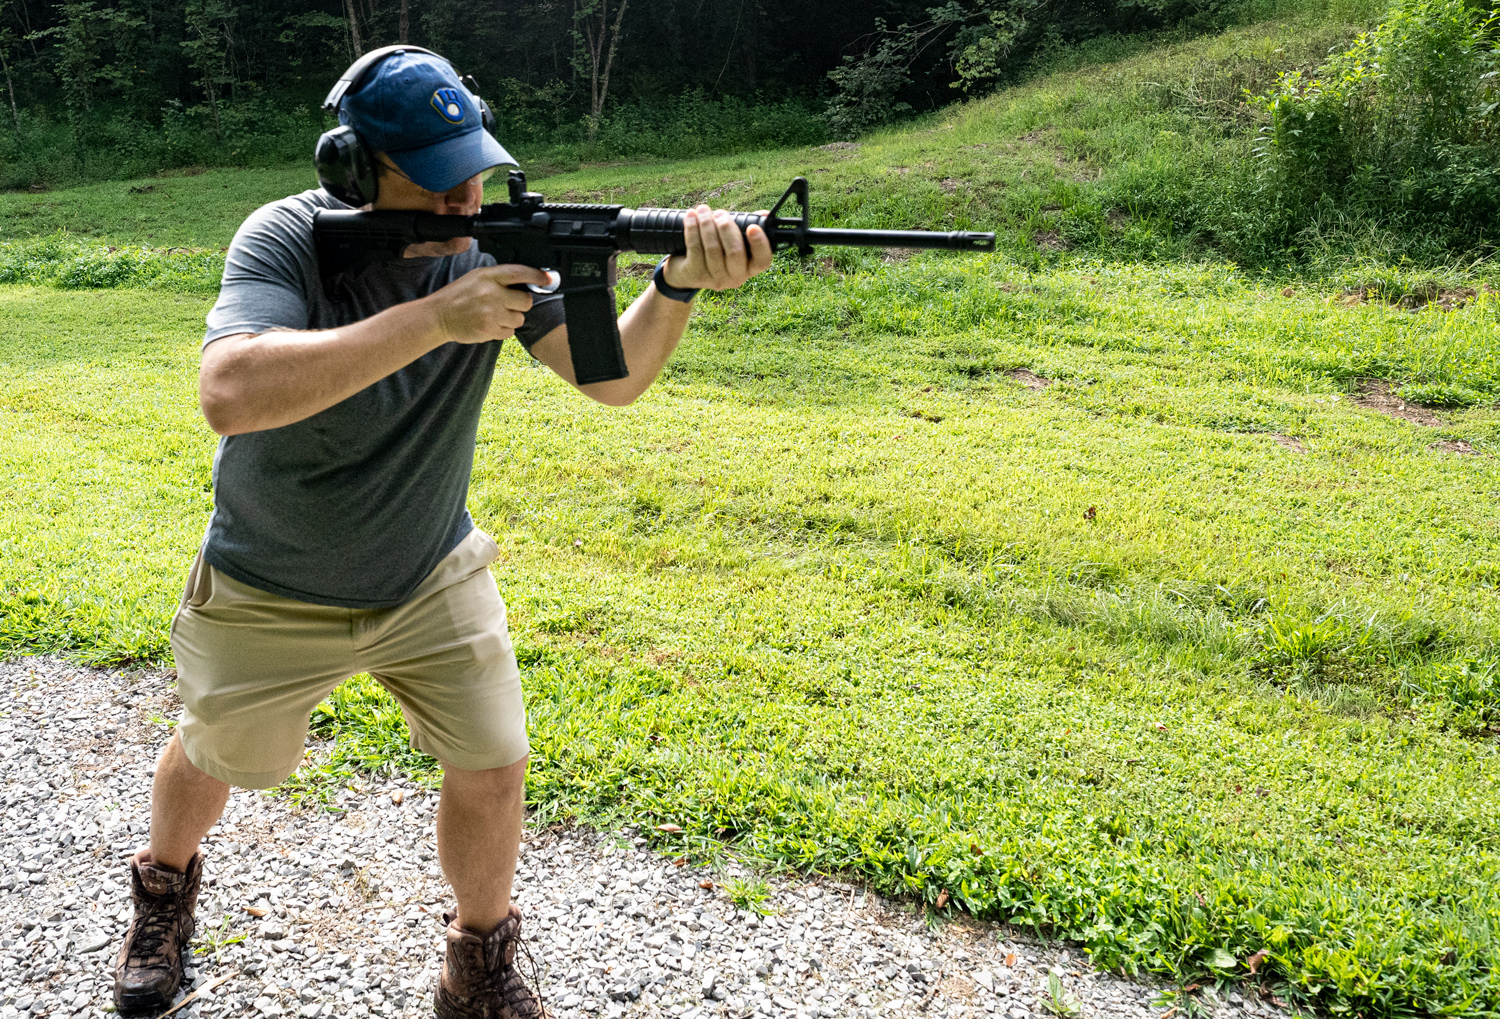 Shooting an AR-15 with a 30 round magazine at a rifle range